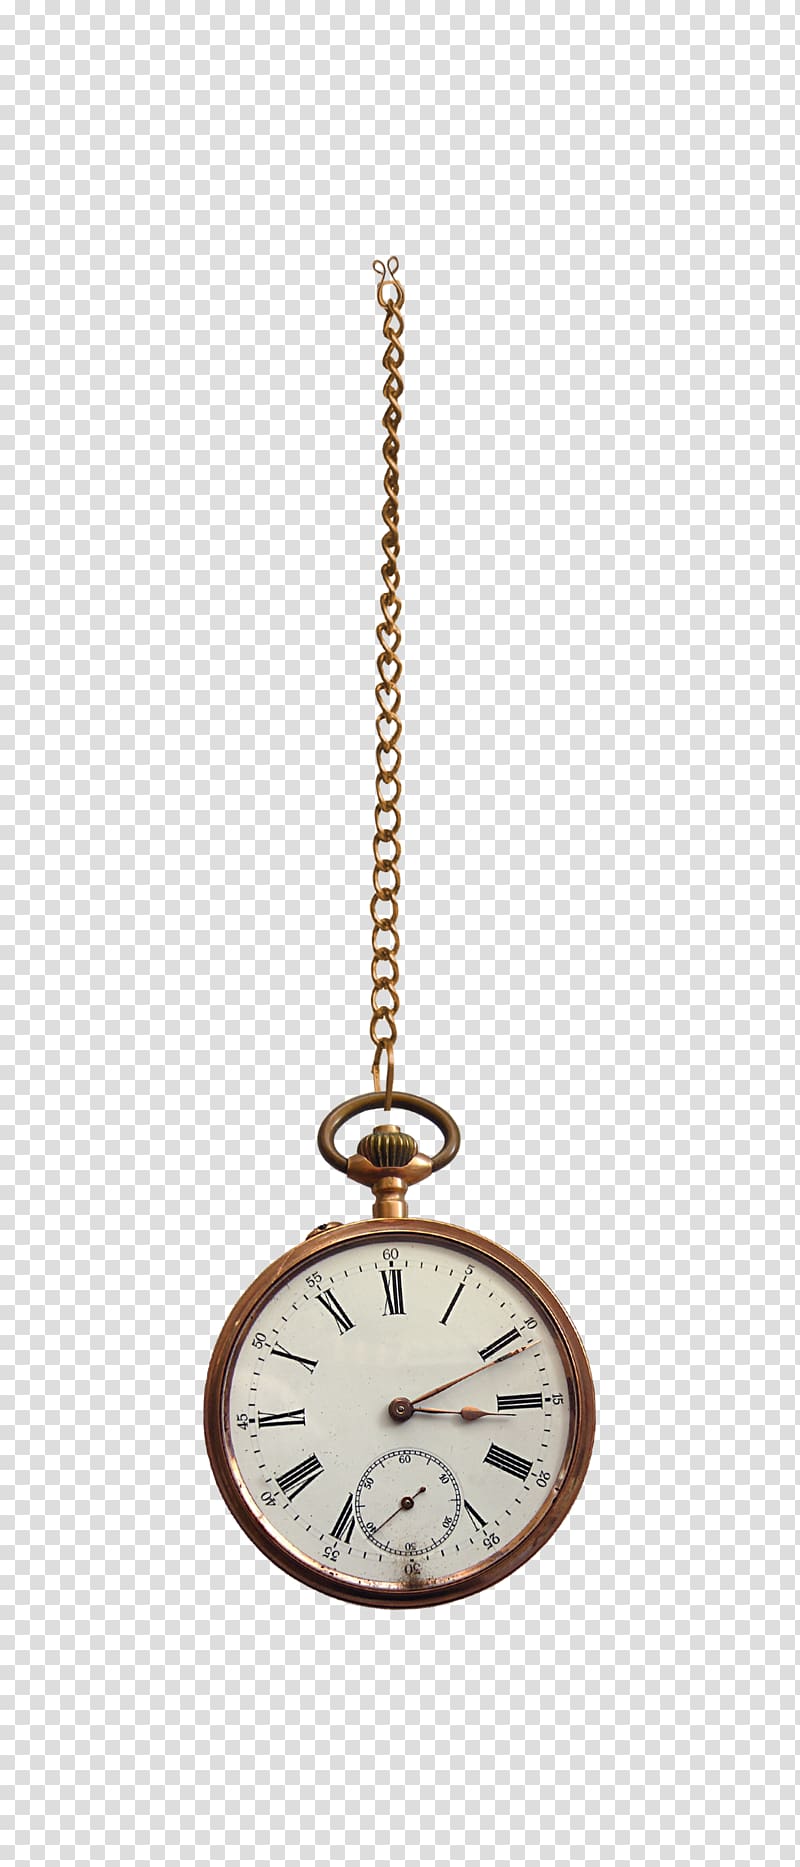 round gold-colored analog pocket watch at 3:11, Pocket watch Charms & Pendants Clock Chain Escapement, pocket watch transparent background PNG clipart